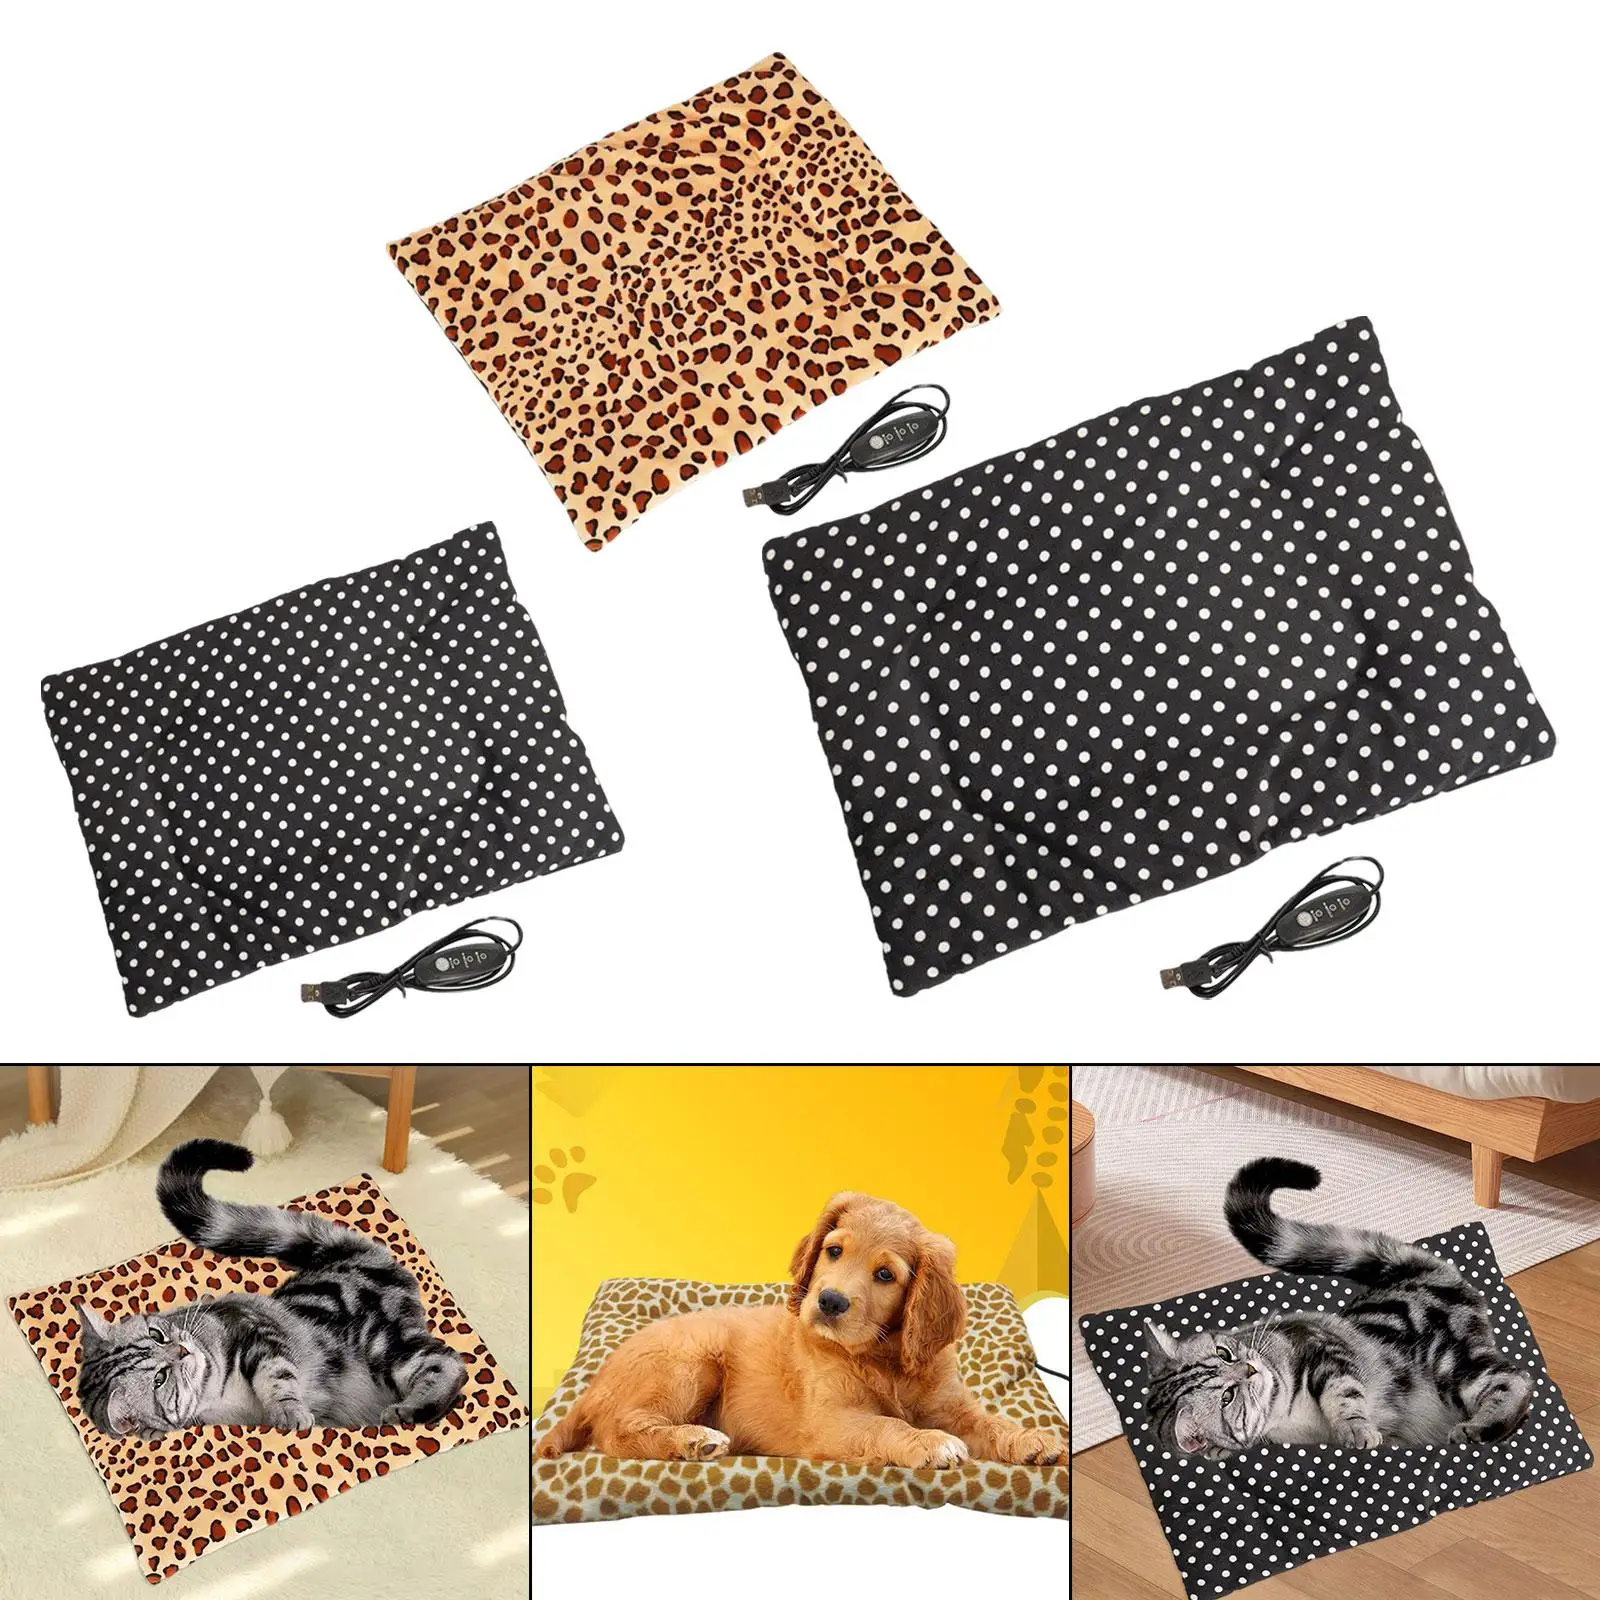 Cats Dogs Warmer Bed 3 Adjustable Temperature Pet Heating Pads Electric Warming Blanket for Sleeping Other Animals Outside Kitty